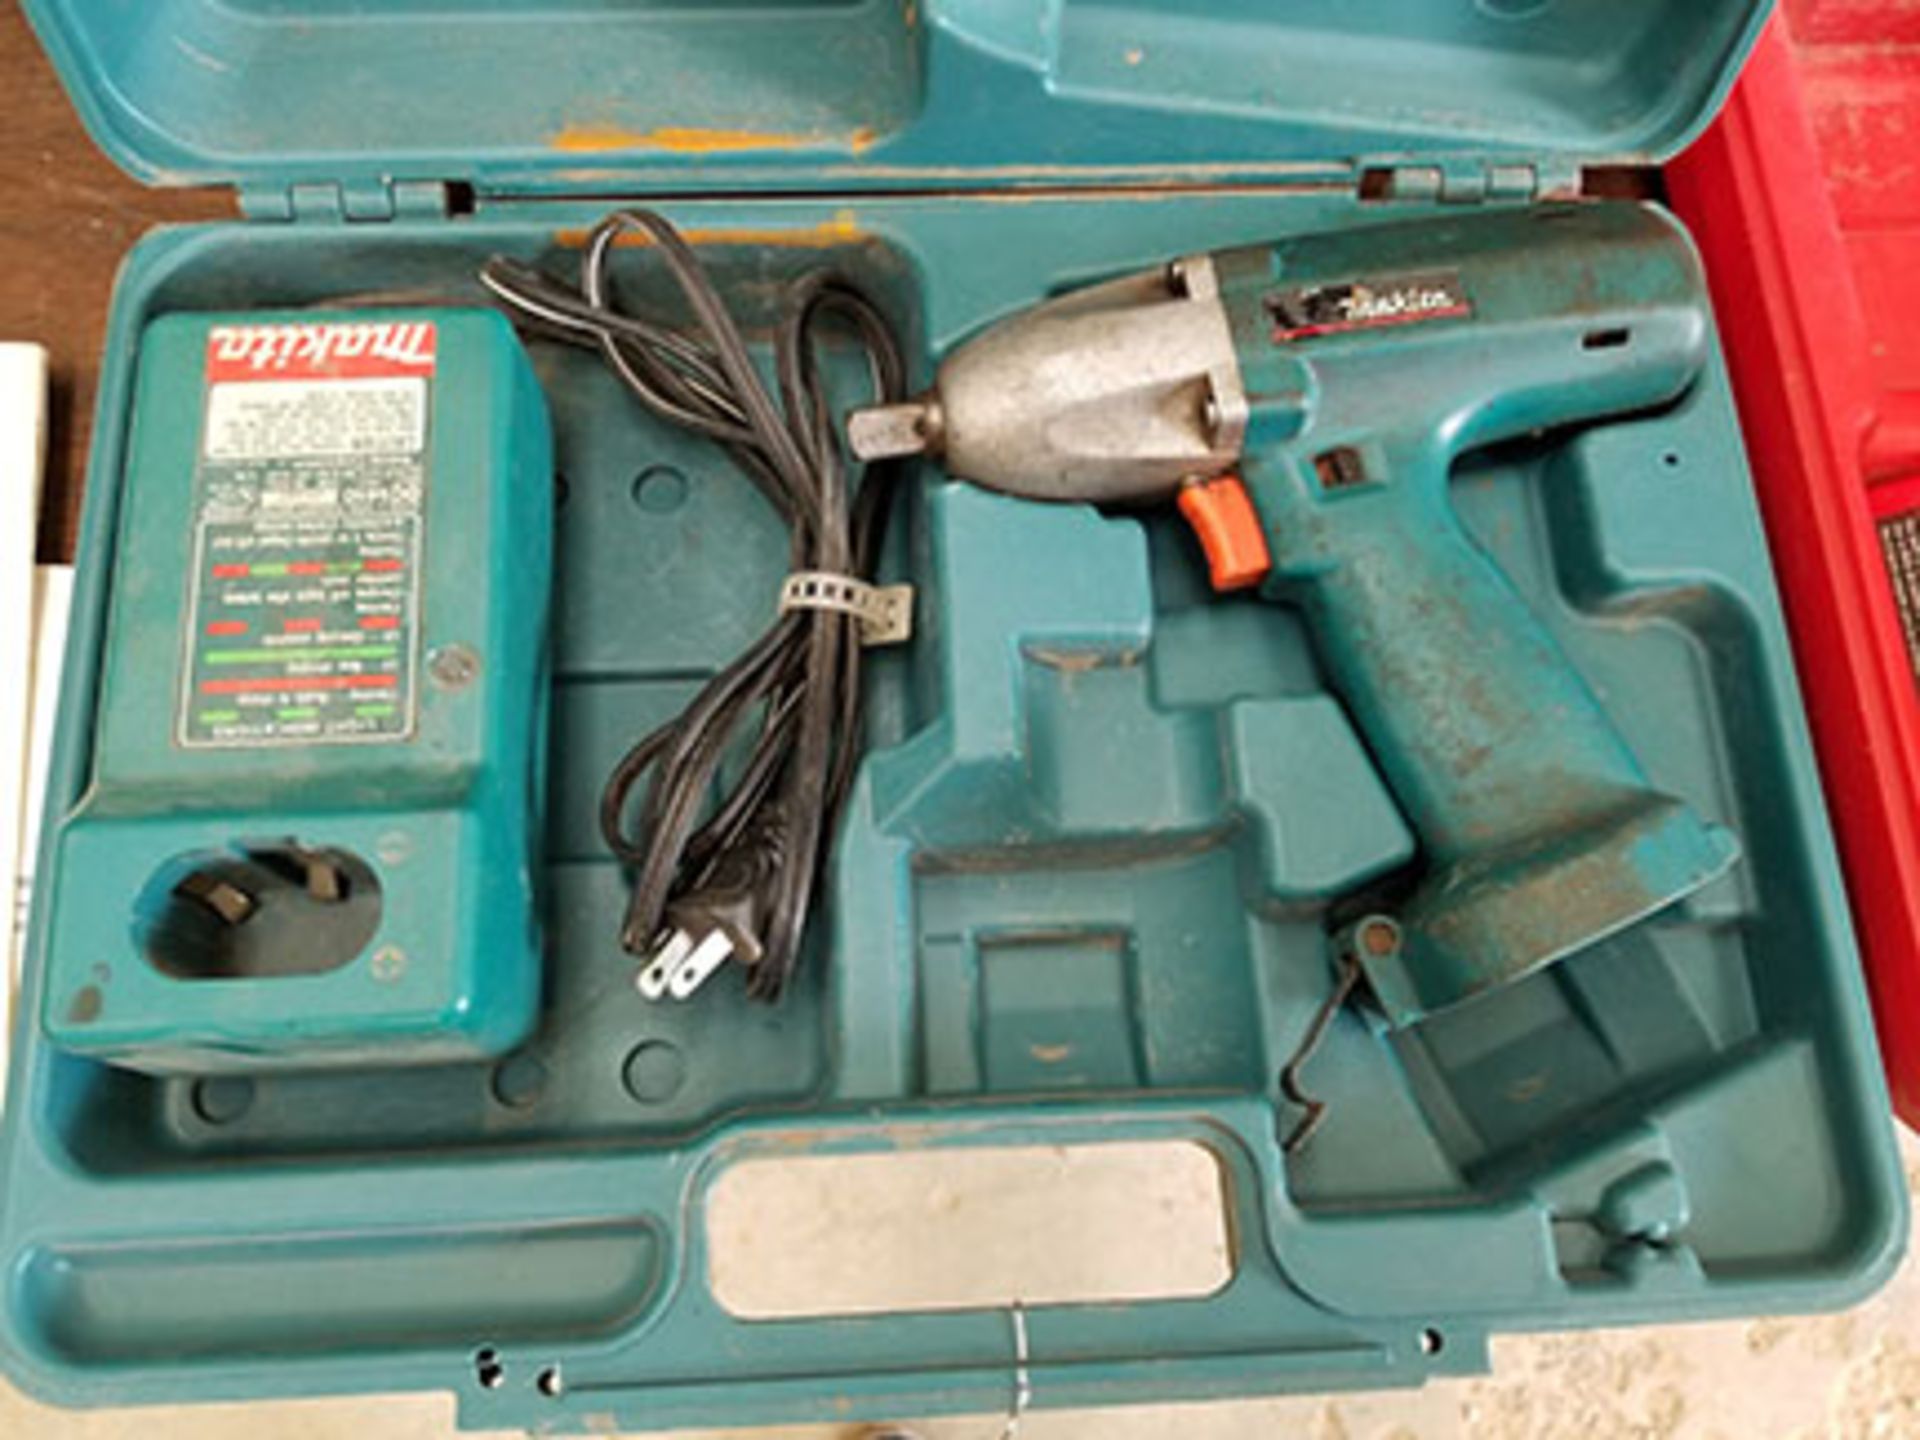 MAKITA AND MILWAUKEE CORDLESS IMPACT WRENCHES, 1/2’’ DRIVE, NO BATTERIES, 12-18V - Image 3 of 6